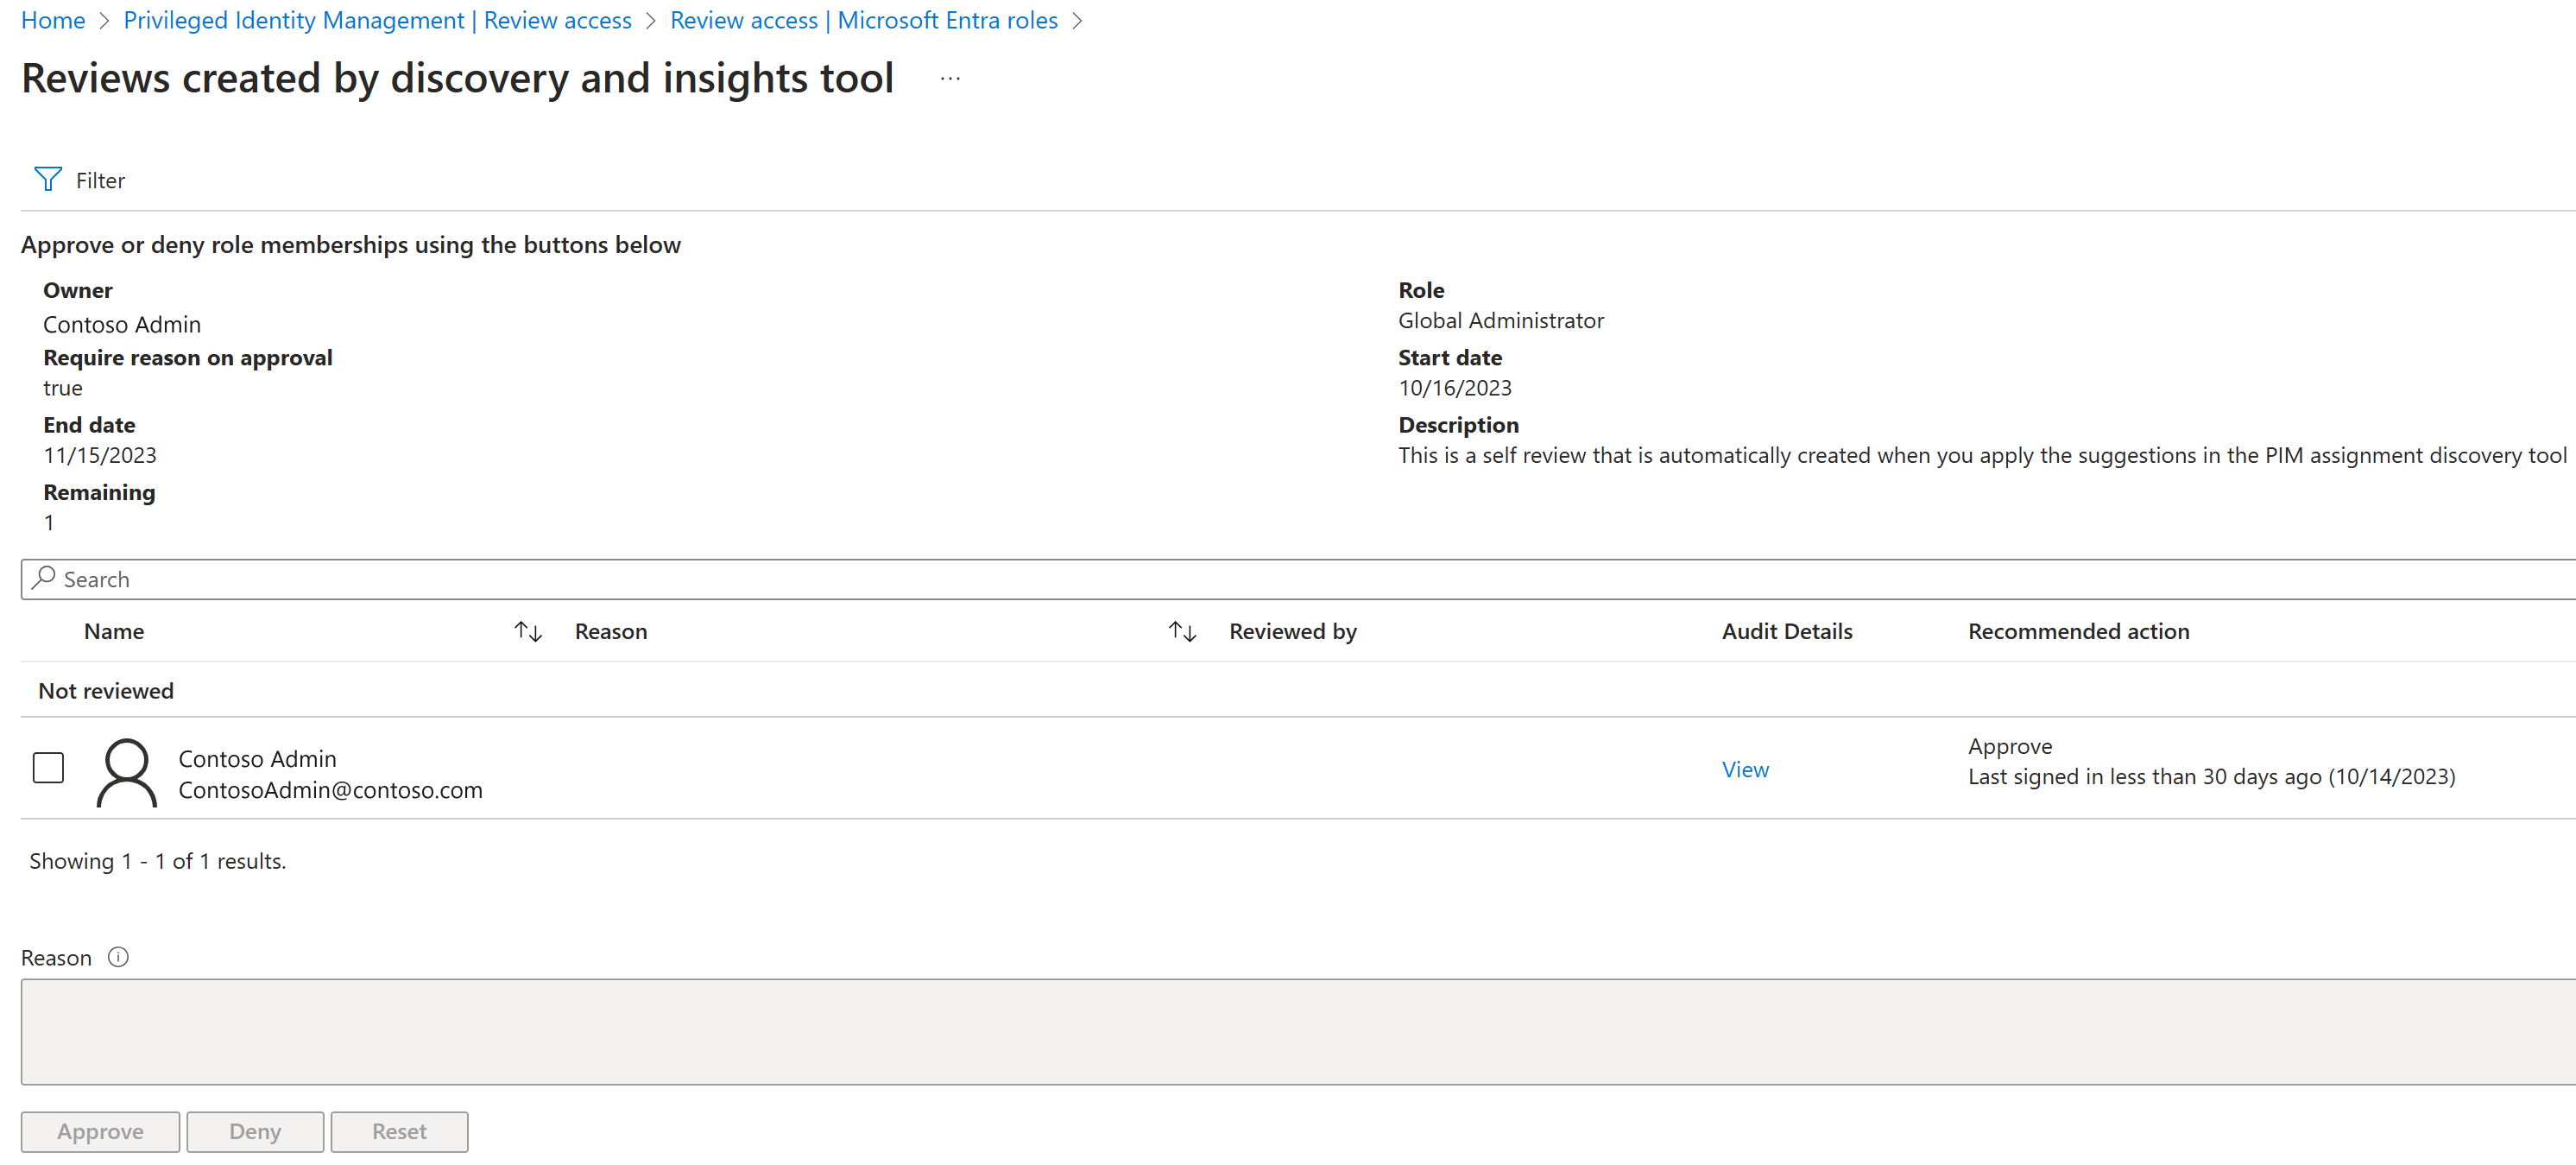 Screenshot of the Create an access review pane for Microsoft Entra roles, within Privileged Identity Manager.